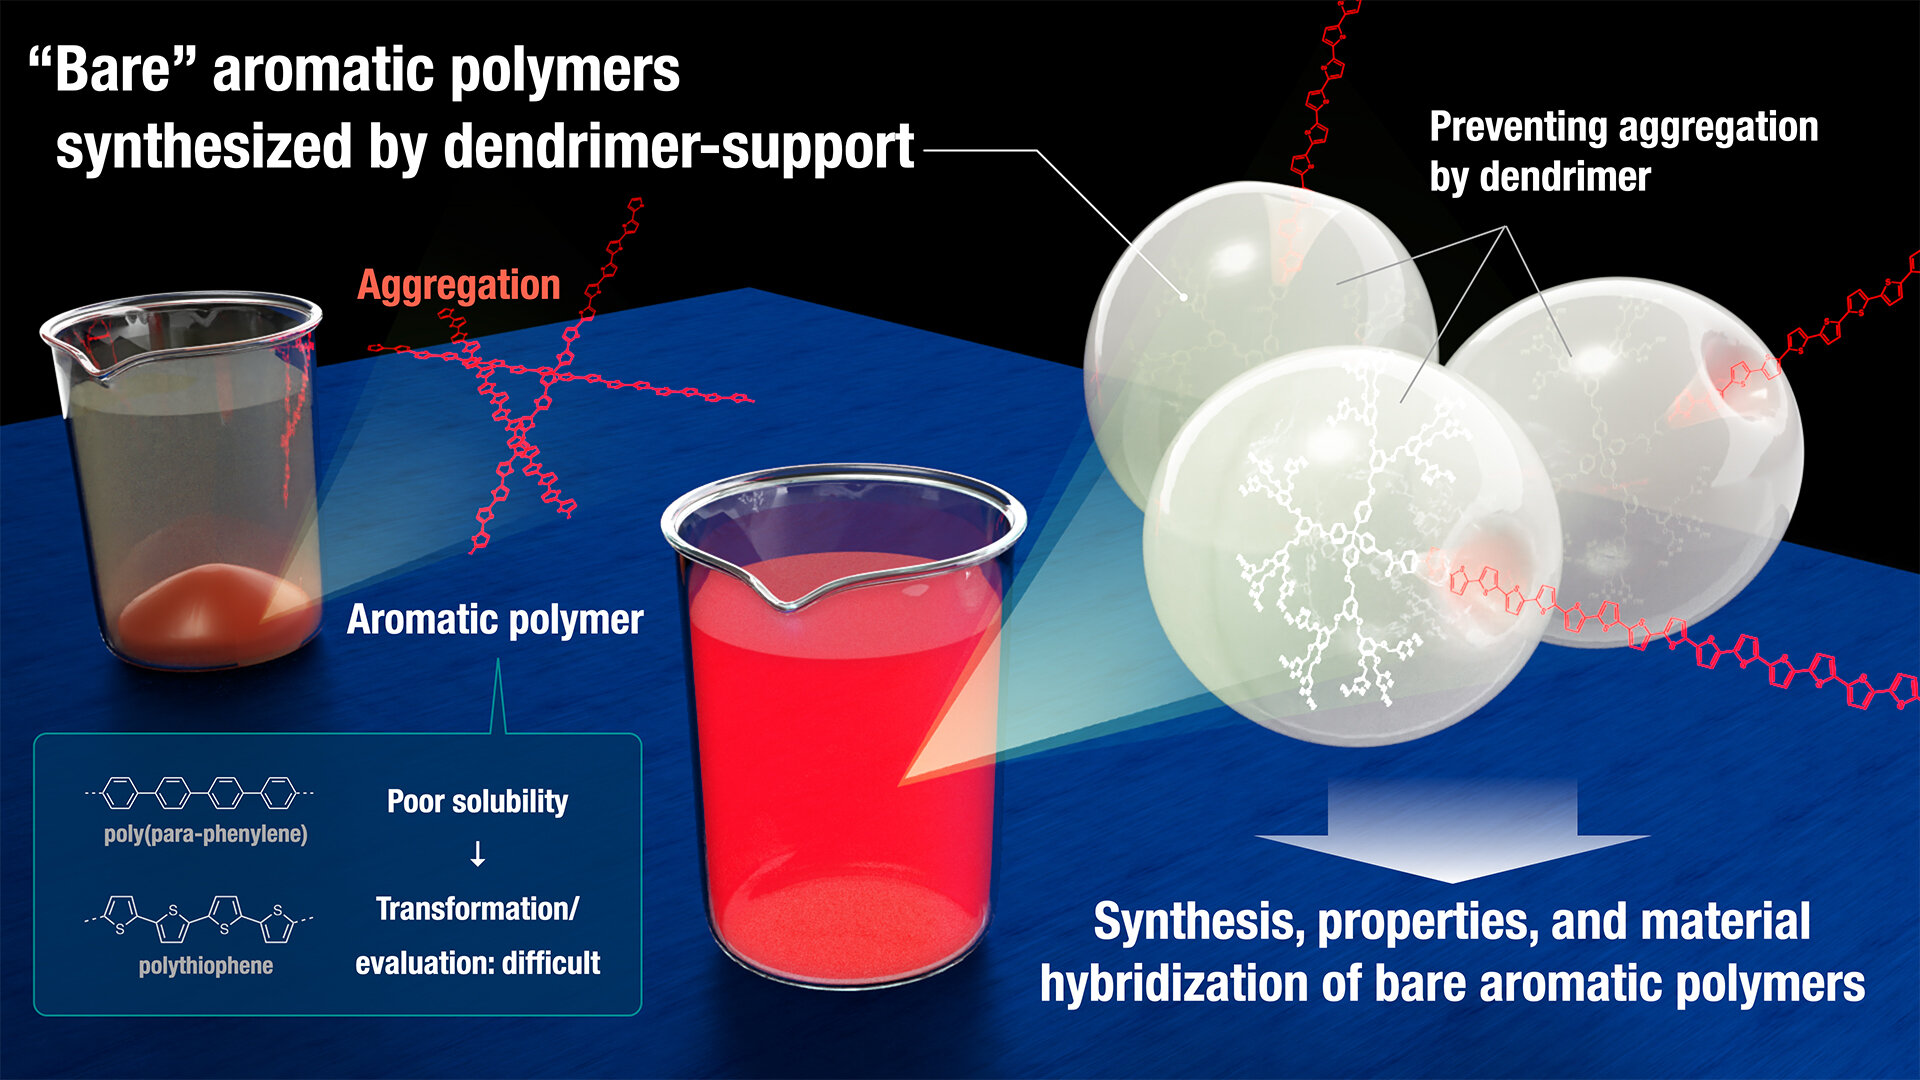 Synthesis of bare aromatic polymers with dendrimer support allows the creation of unique hybrid materials